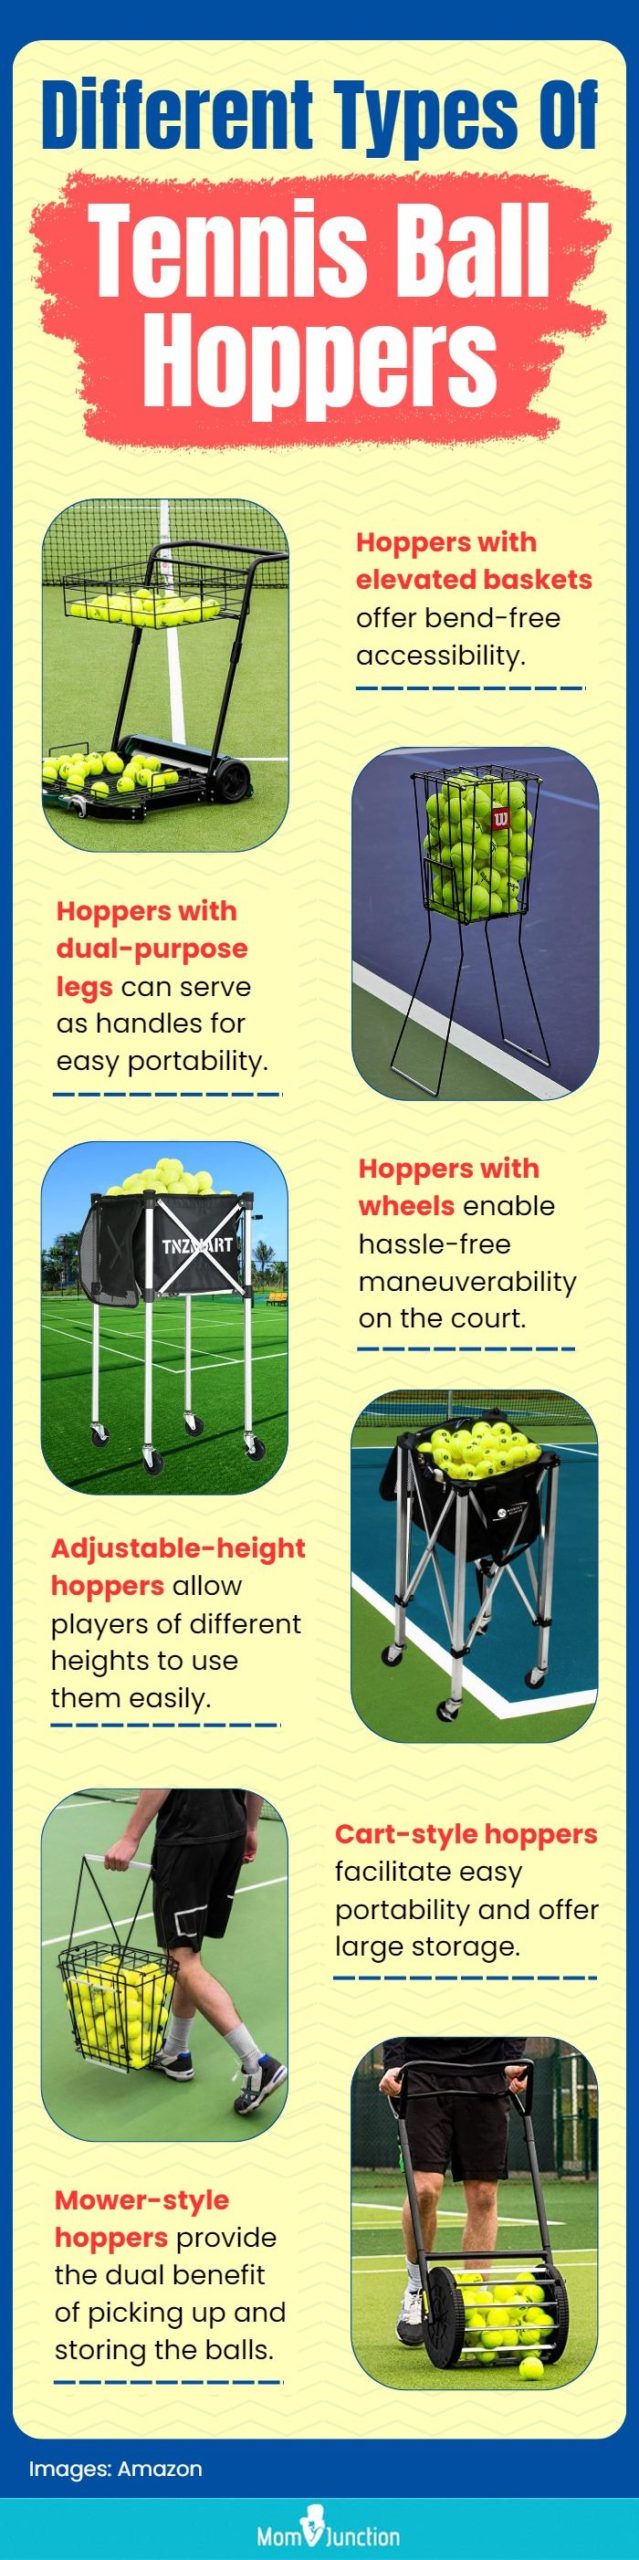 Different Types Of Tennis Ball Hoppers (infographic)